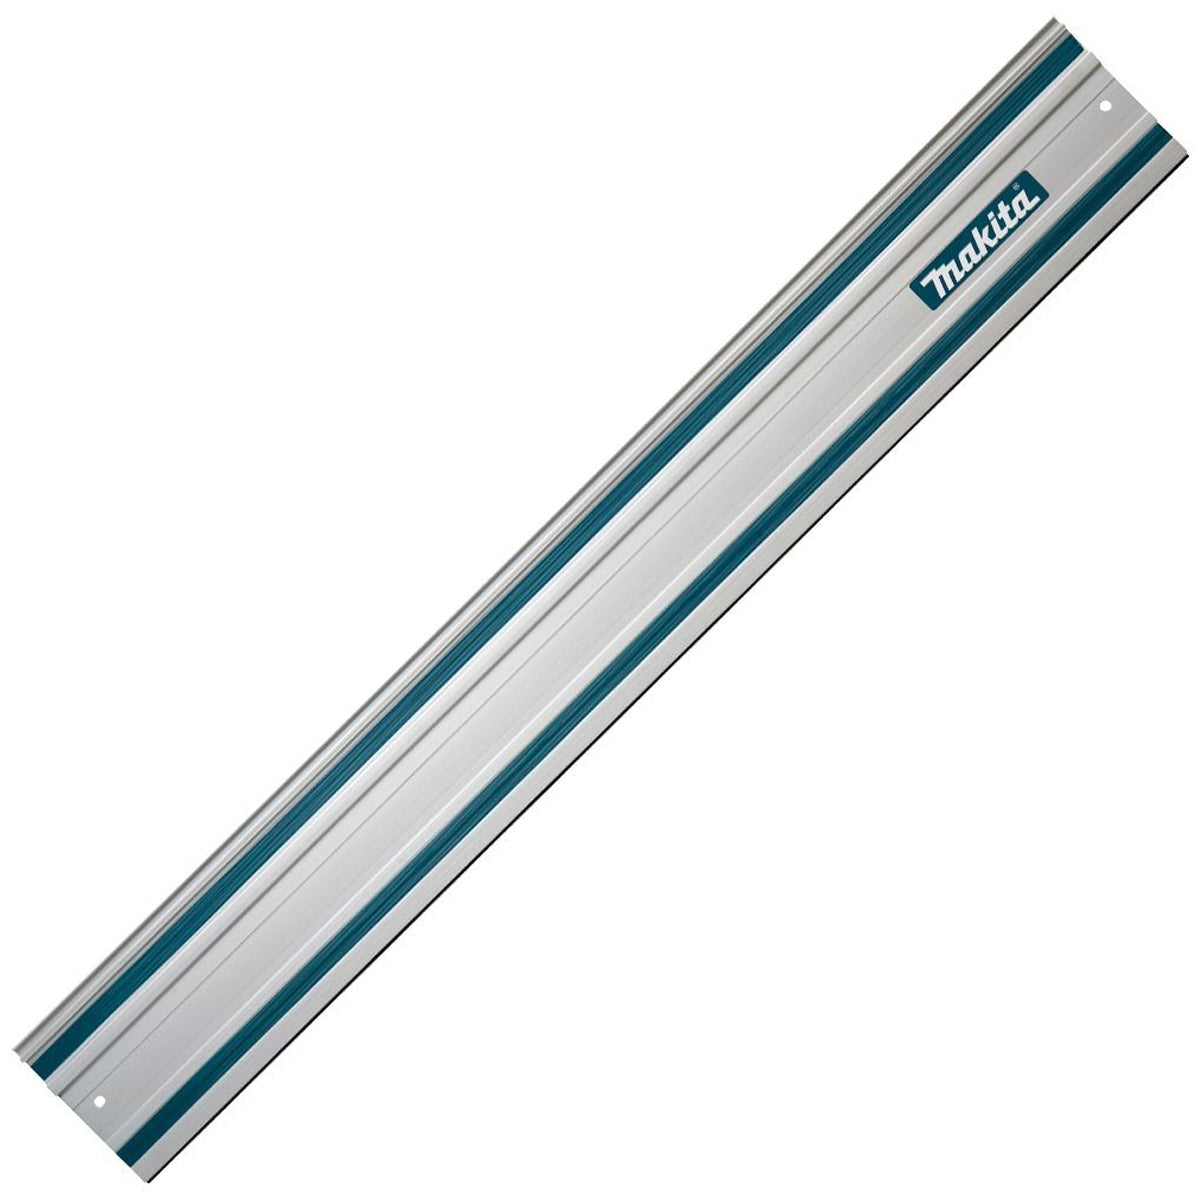 Makita 199141-8 1.5m Plunge Saw Guide Rail For DSP600ZJ & SP6000J